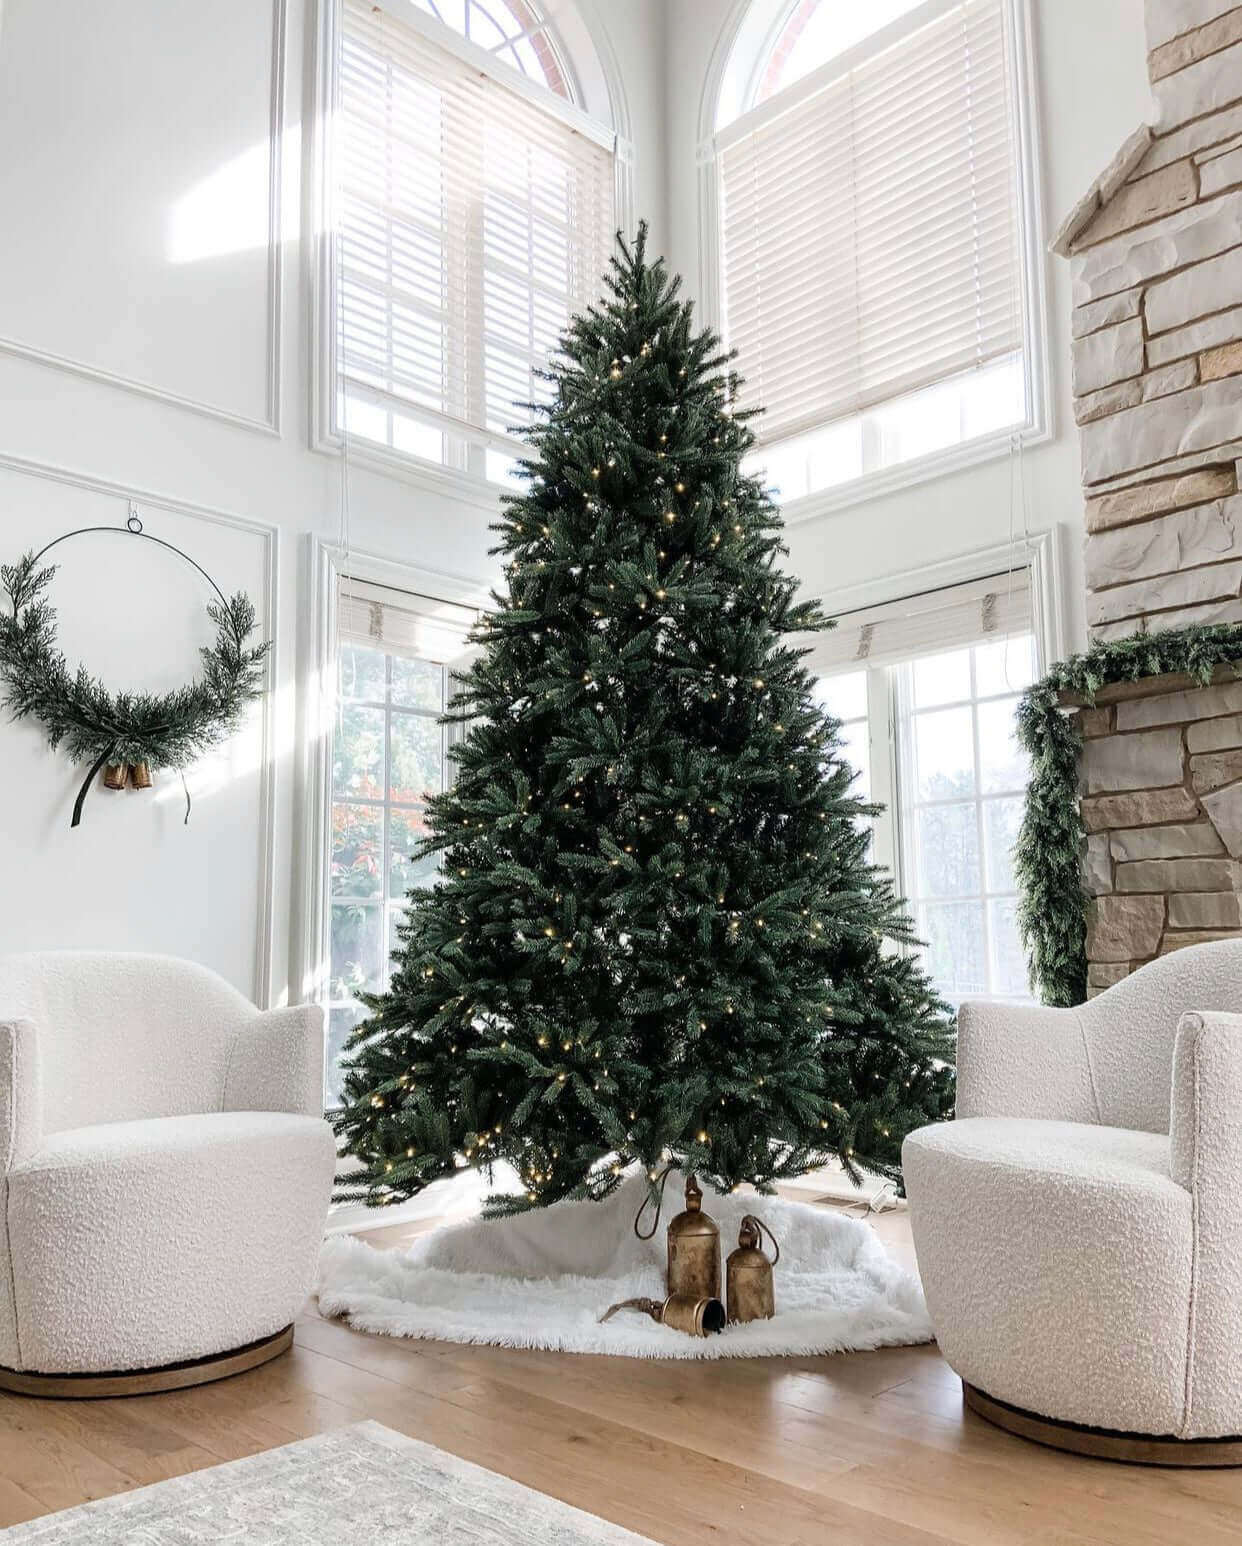 King of Christmas 6.5' King Fraser Fir Quick-Shape Artificial Christmas Tree with 750 Warm White & Multi-Color LED Lights